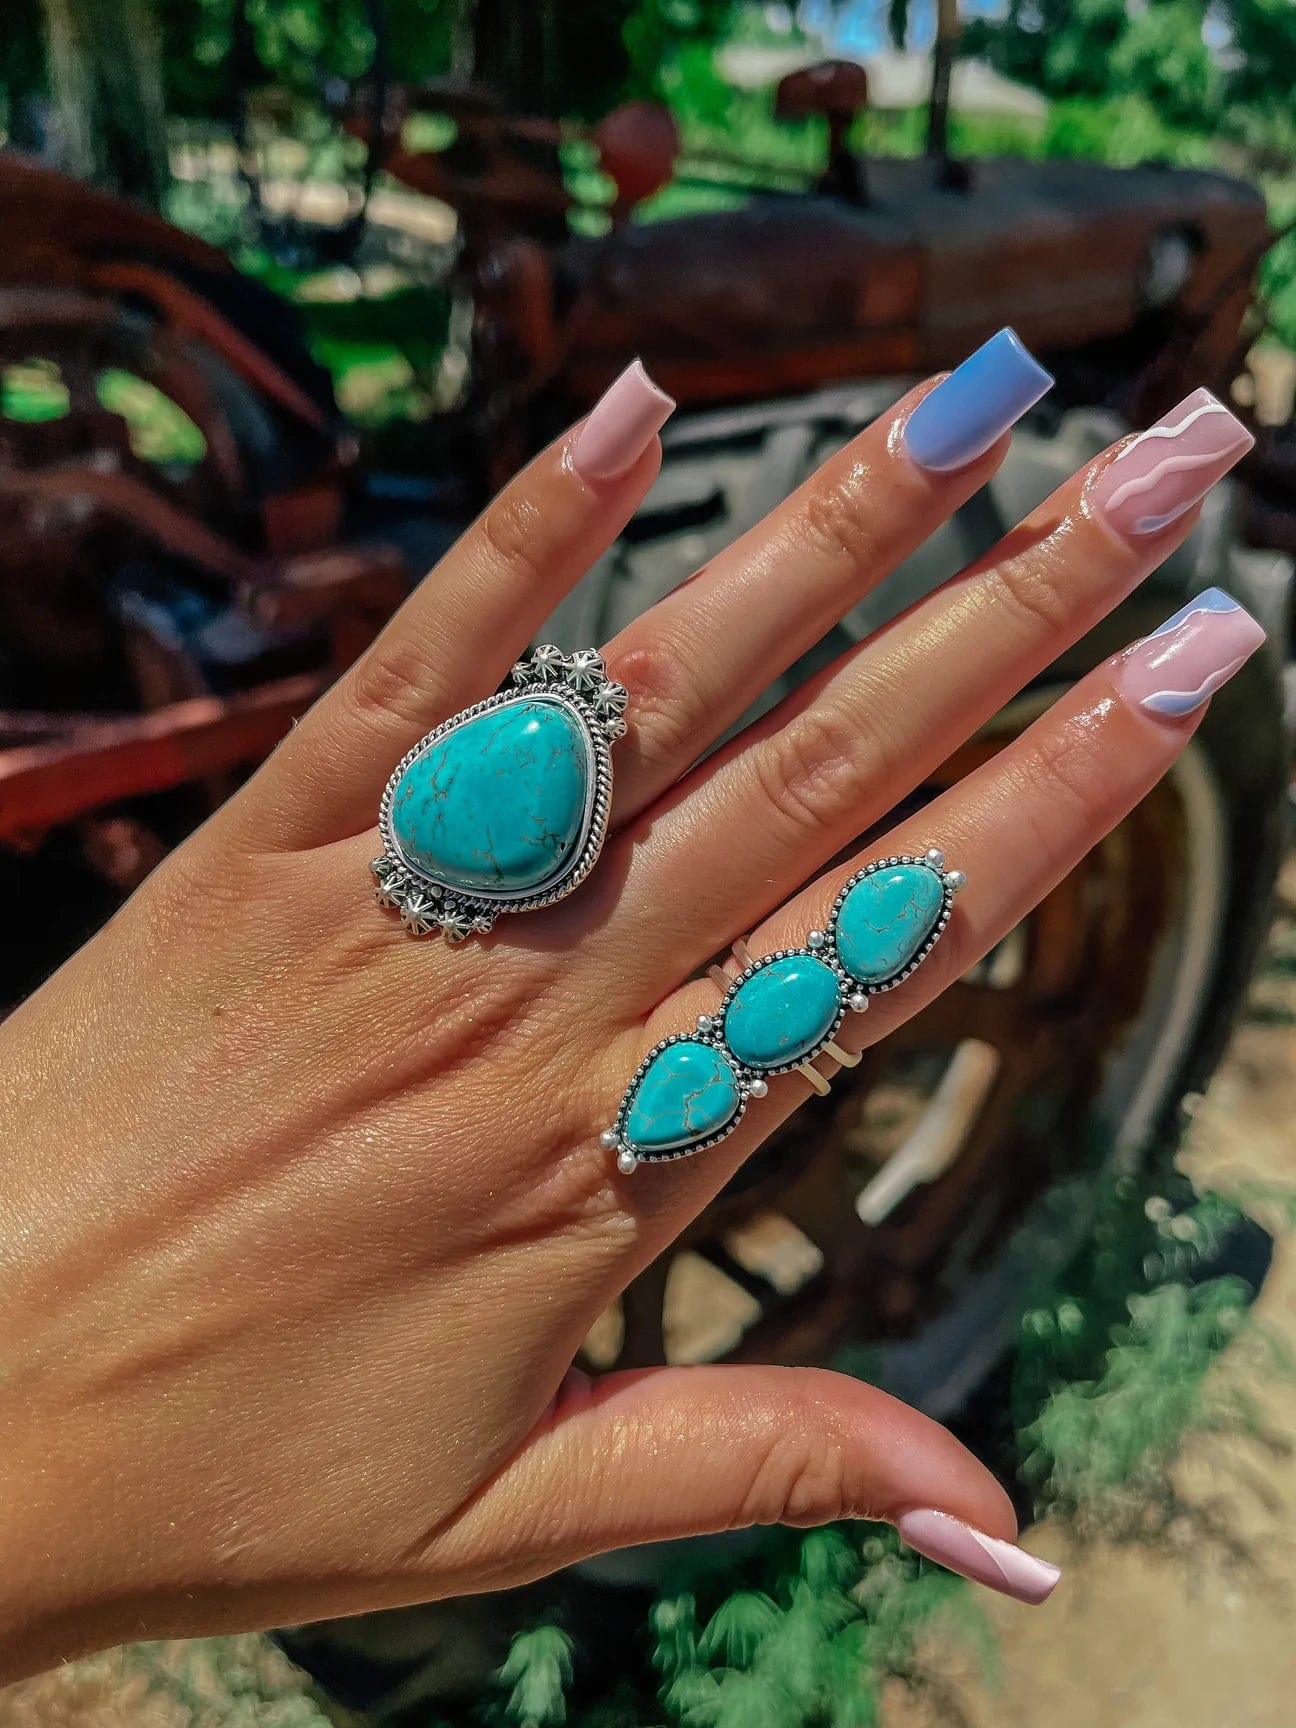 Adjustable Natural Stone Rings In Silver And Gold With Turquoise Rings For  Women, Amethysts, Pink Quartz Crystal Perfect For Parties And Weddings  Available In 10mm And 12mm Sizes For Women From Enjoy_time,